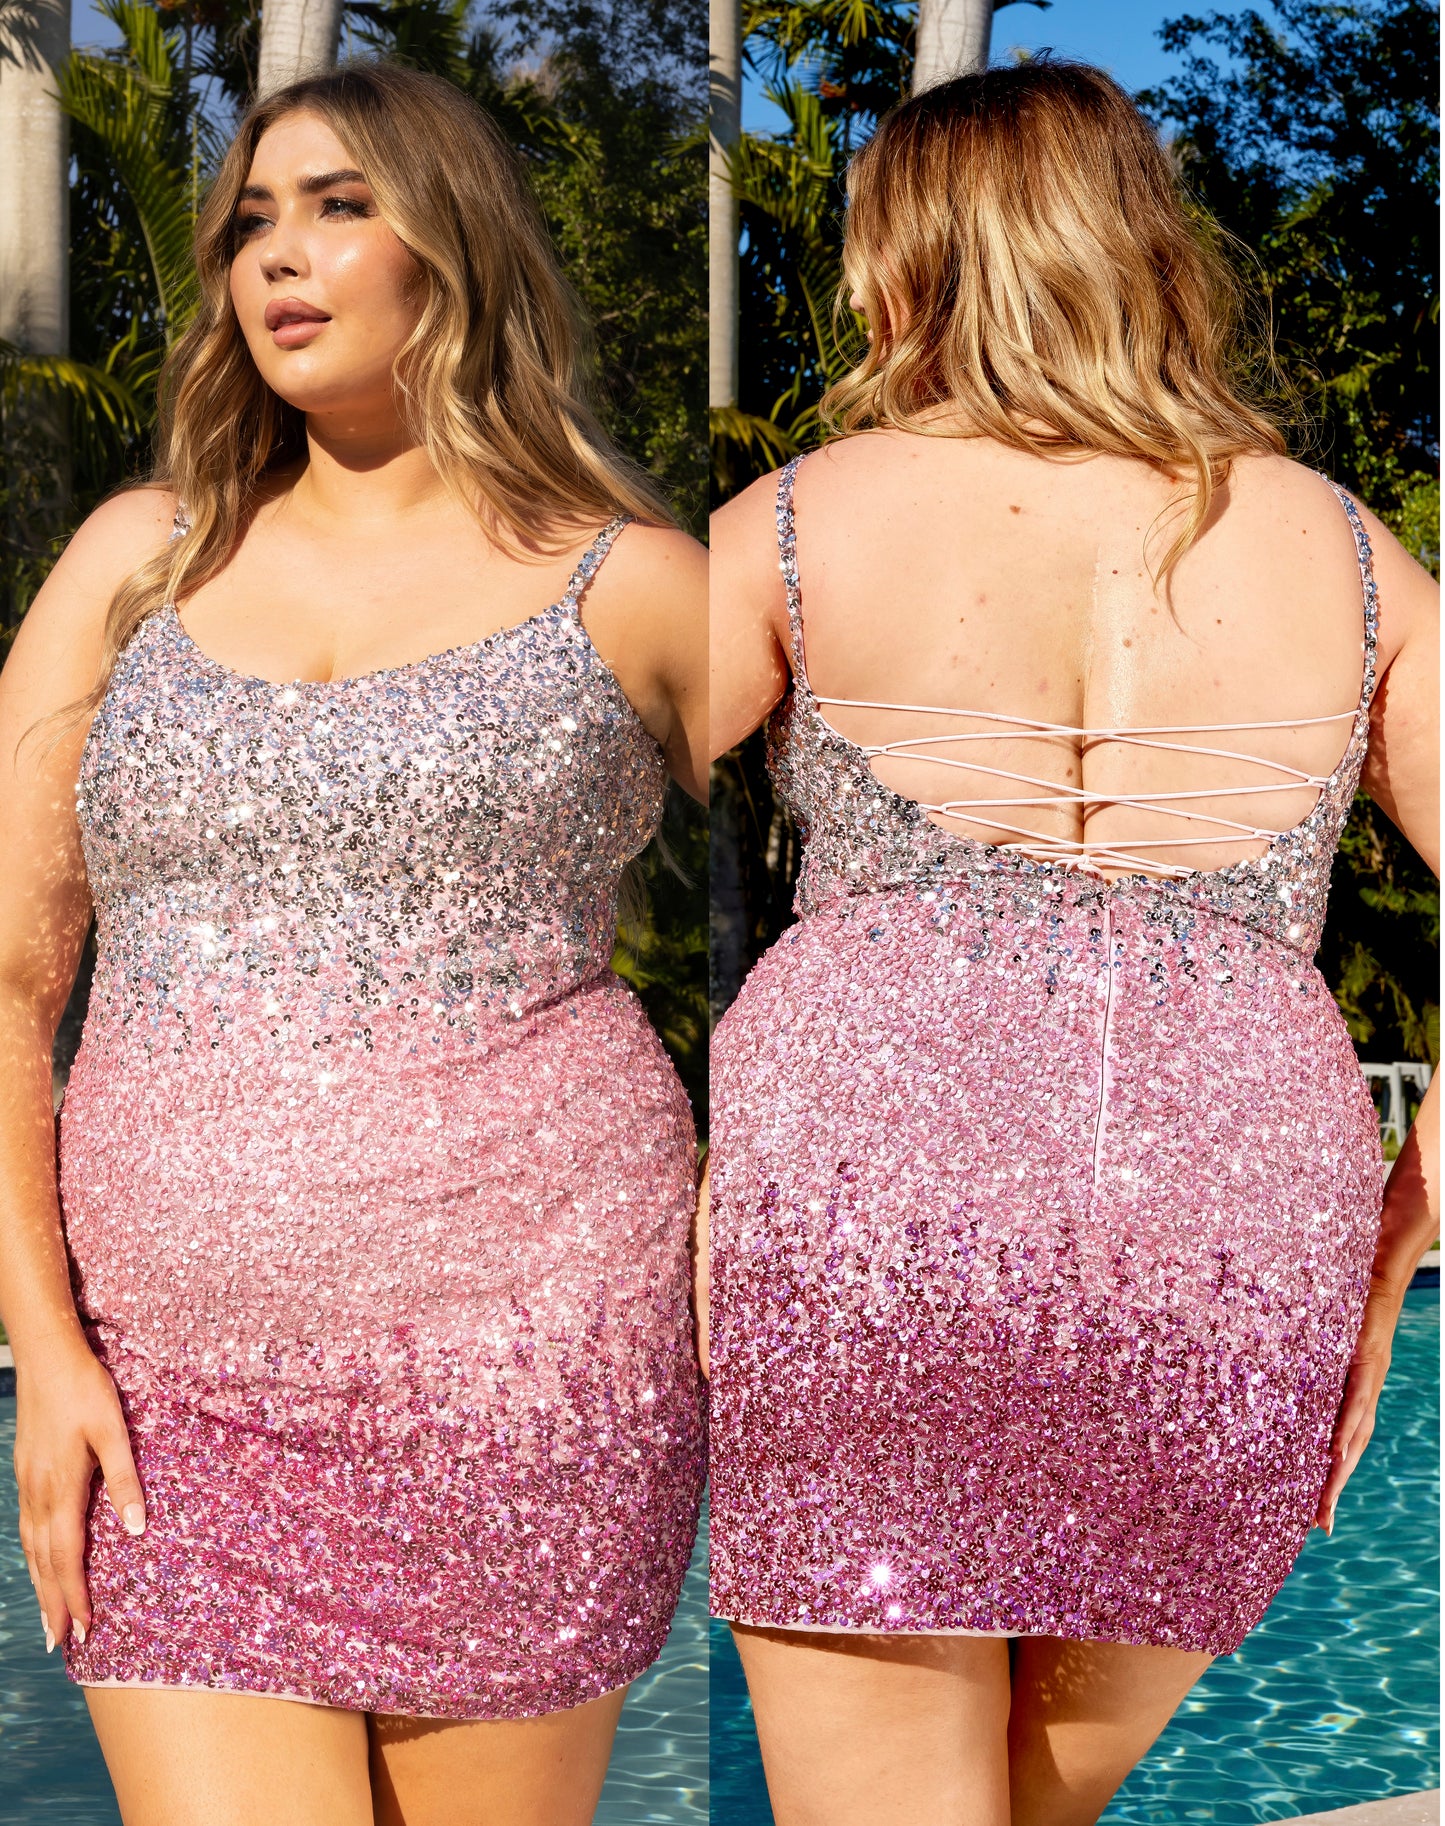 Primavera Couture 14025 Ombre Sequin Embellished Spaghetti Strap Open Tie Back Curvy Short Homecoming Cocktail Dress. The Primavera Couture 14025 dress features a stunning ombre sequin design with spaghetti straps and an open tie-back for flattering and chic styling. Crafted for curvy silhouettes, this dress is perfect for any special occasion.